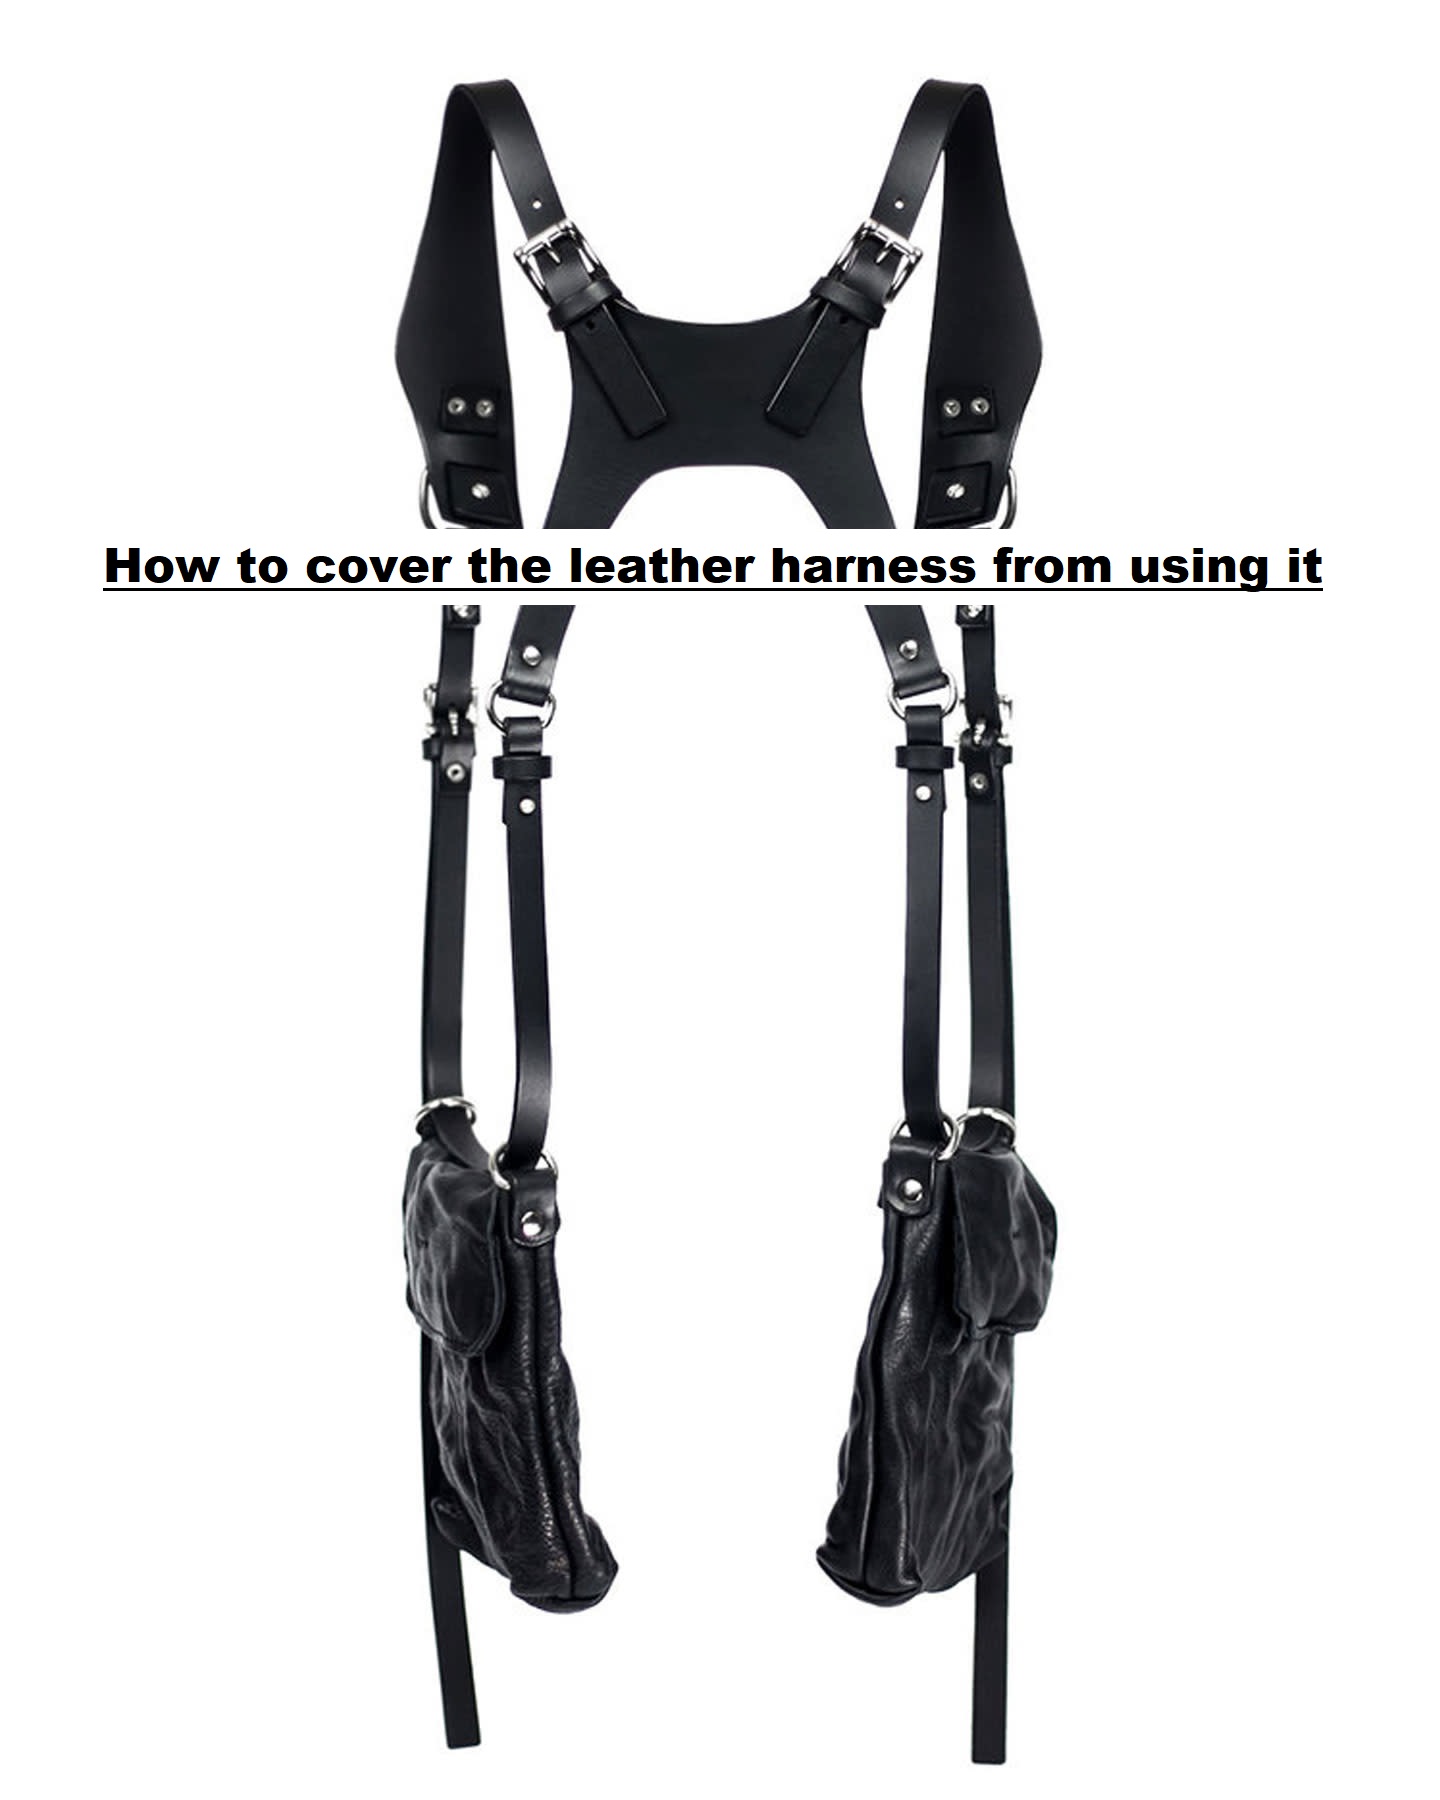 How to cover the leather harness from using it